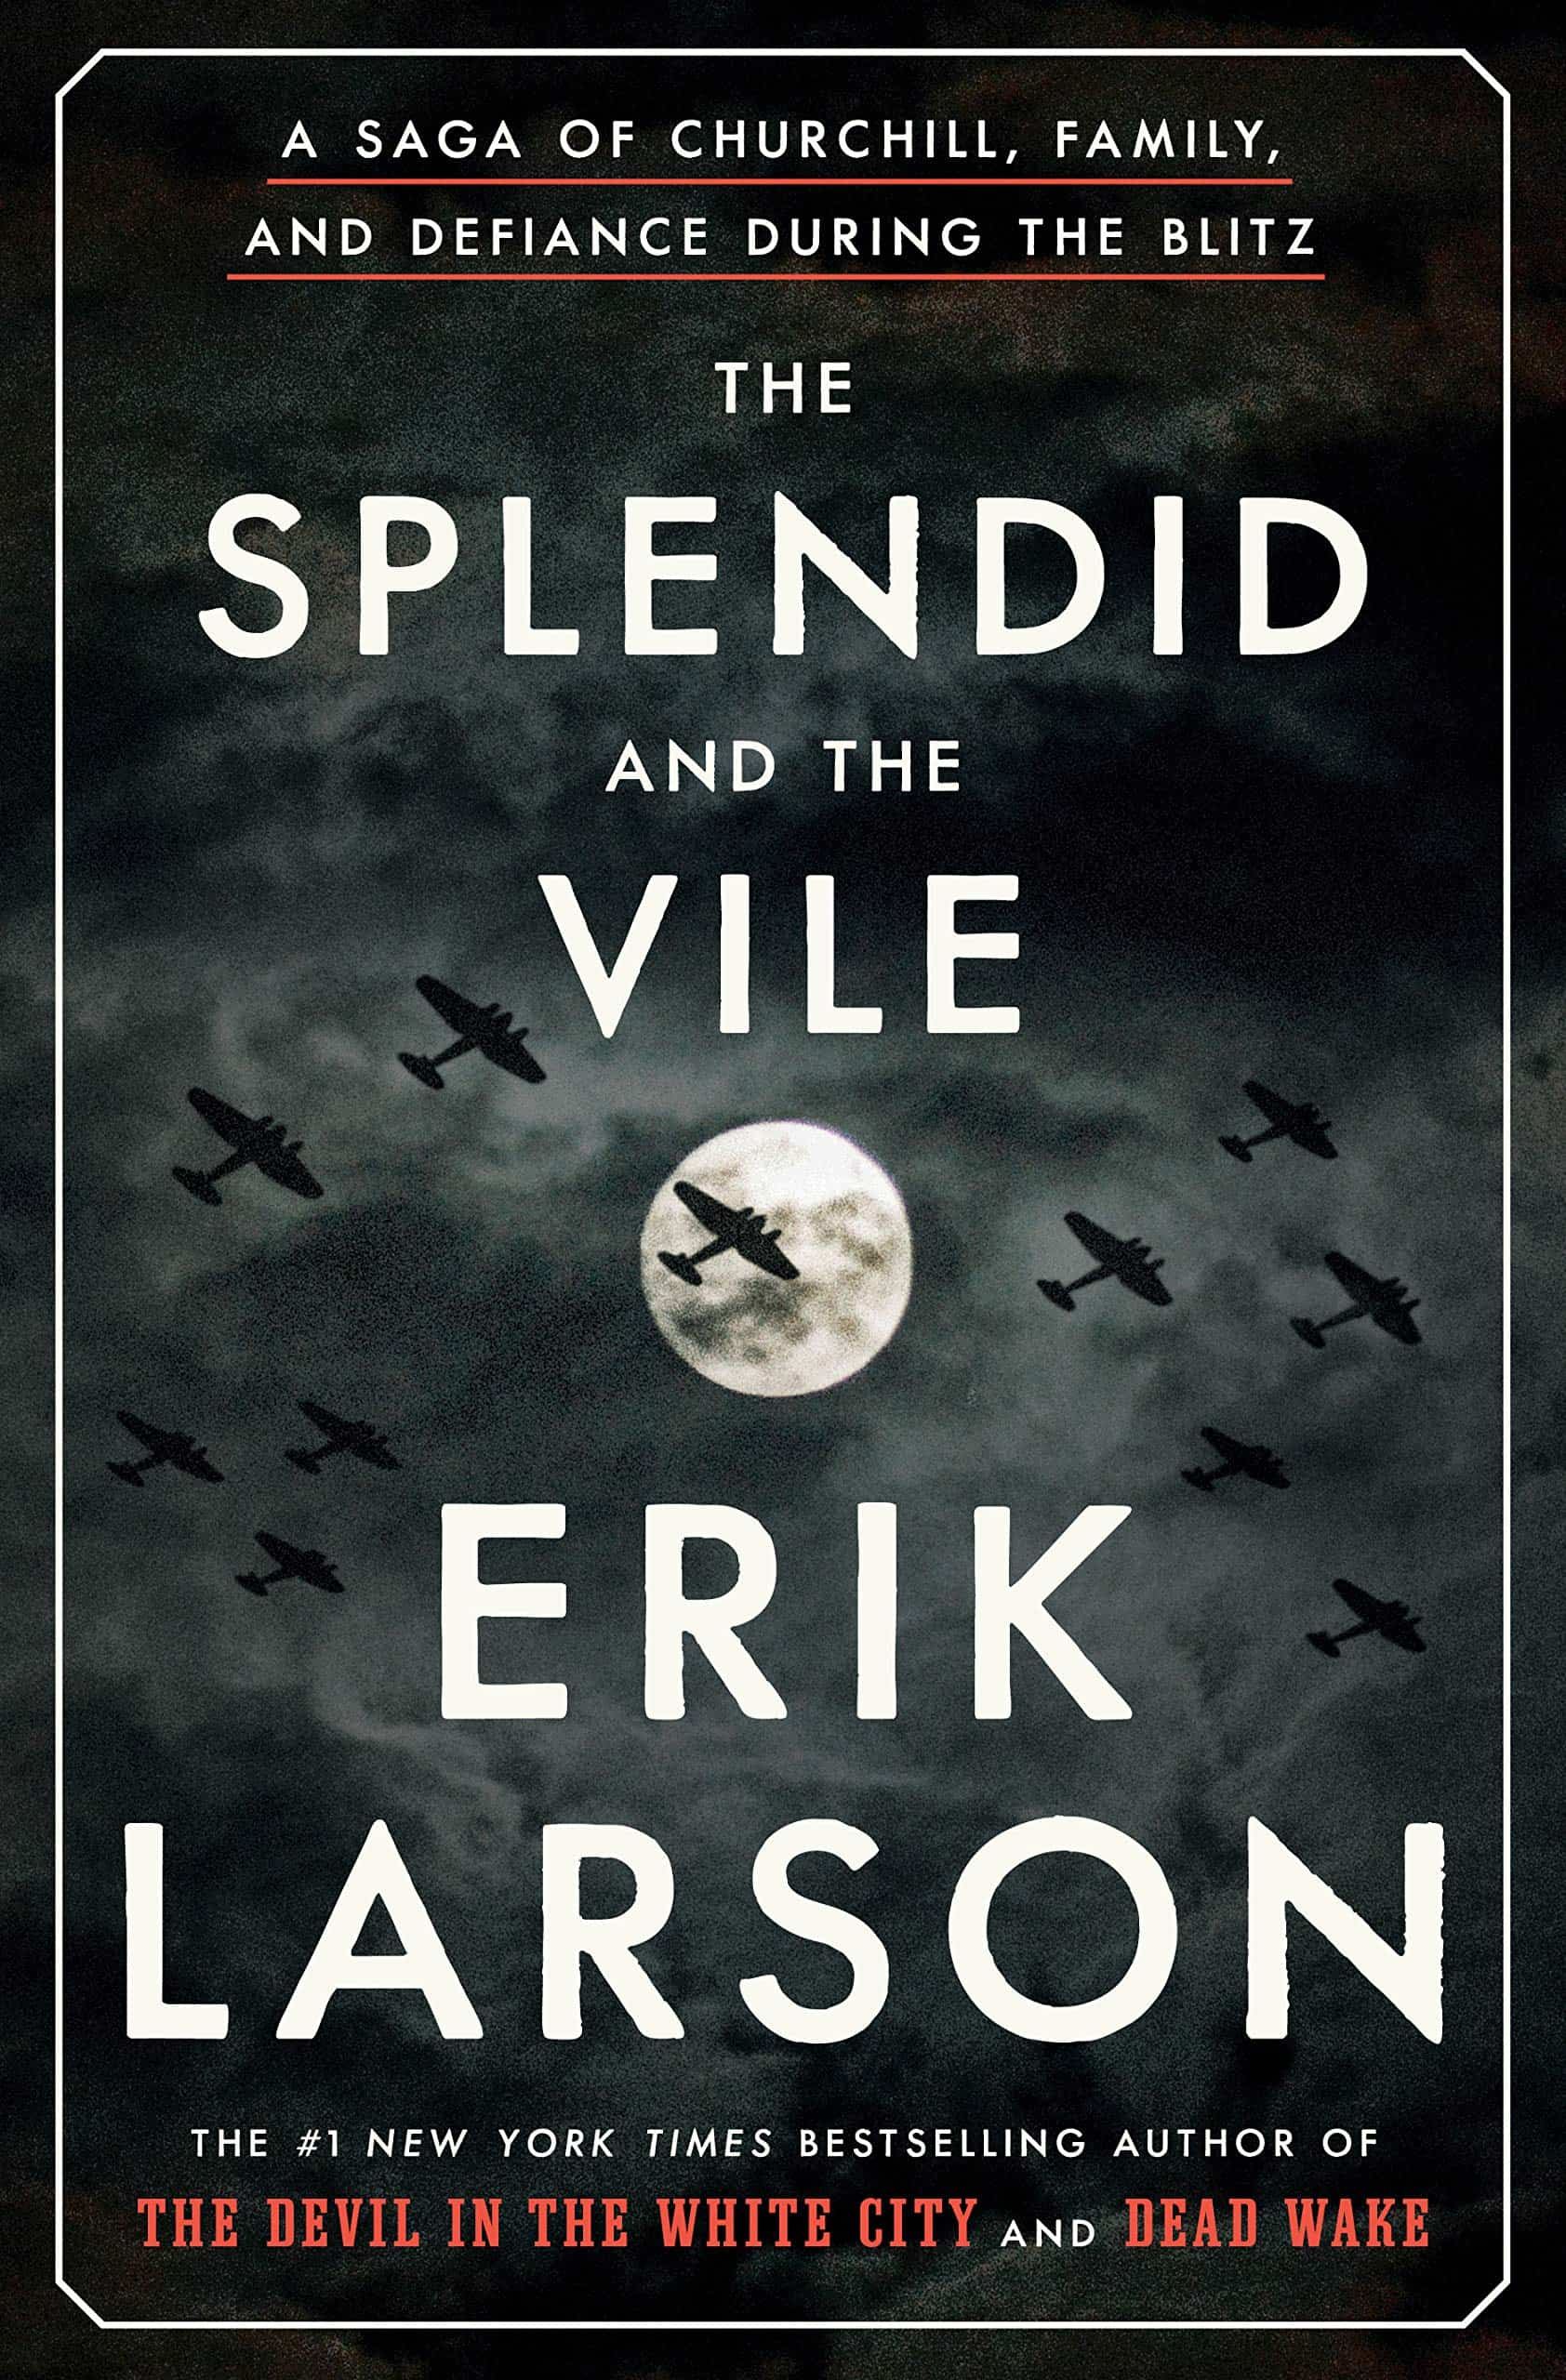 The cover of The Splendid and the Vile